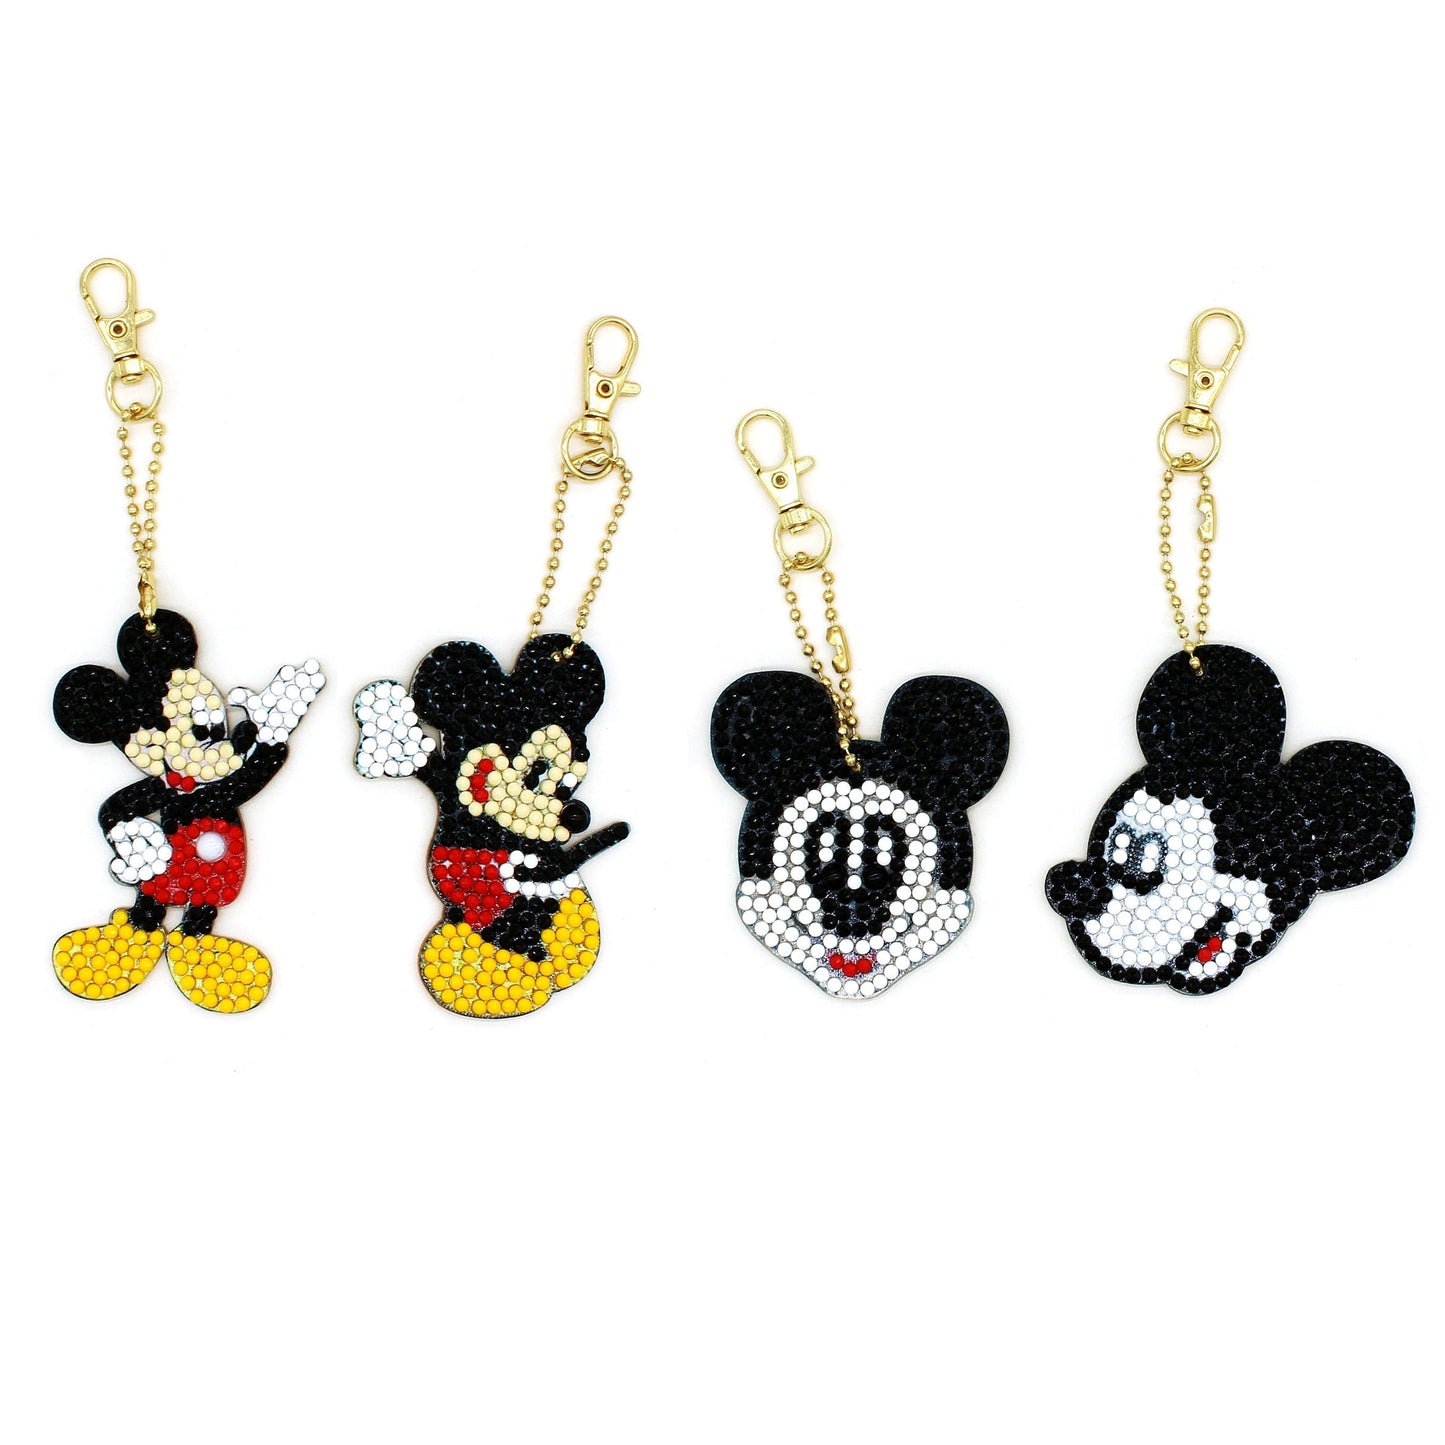 Double-sided stickers special diamond painted keychain key ring-Mickey